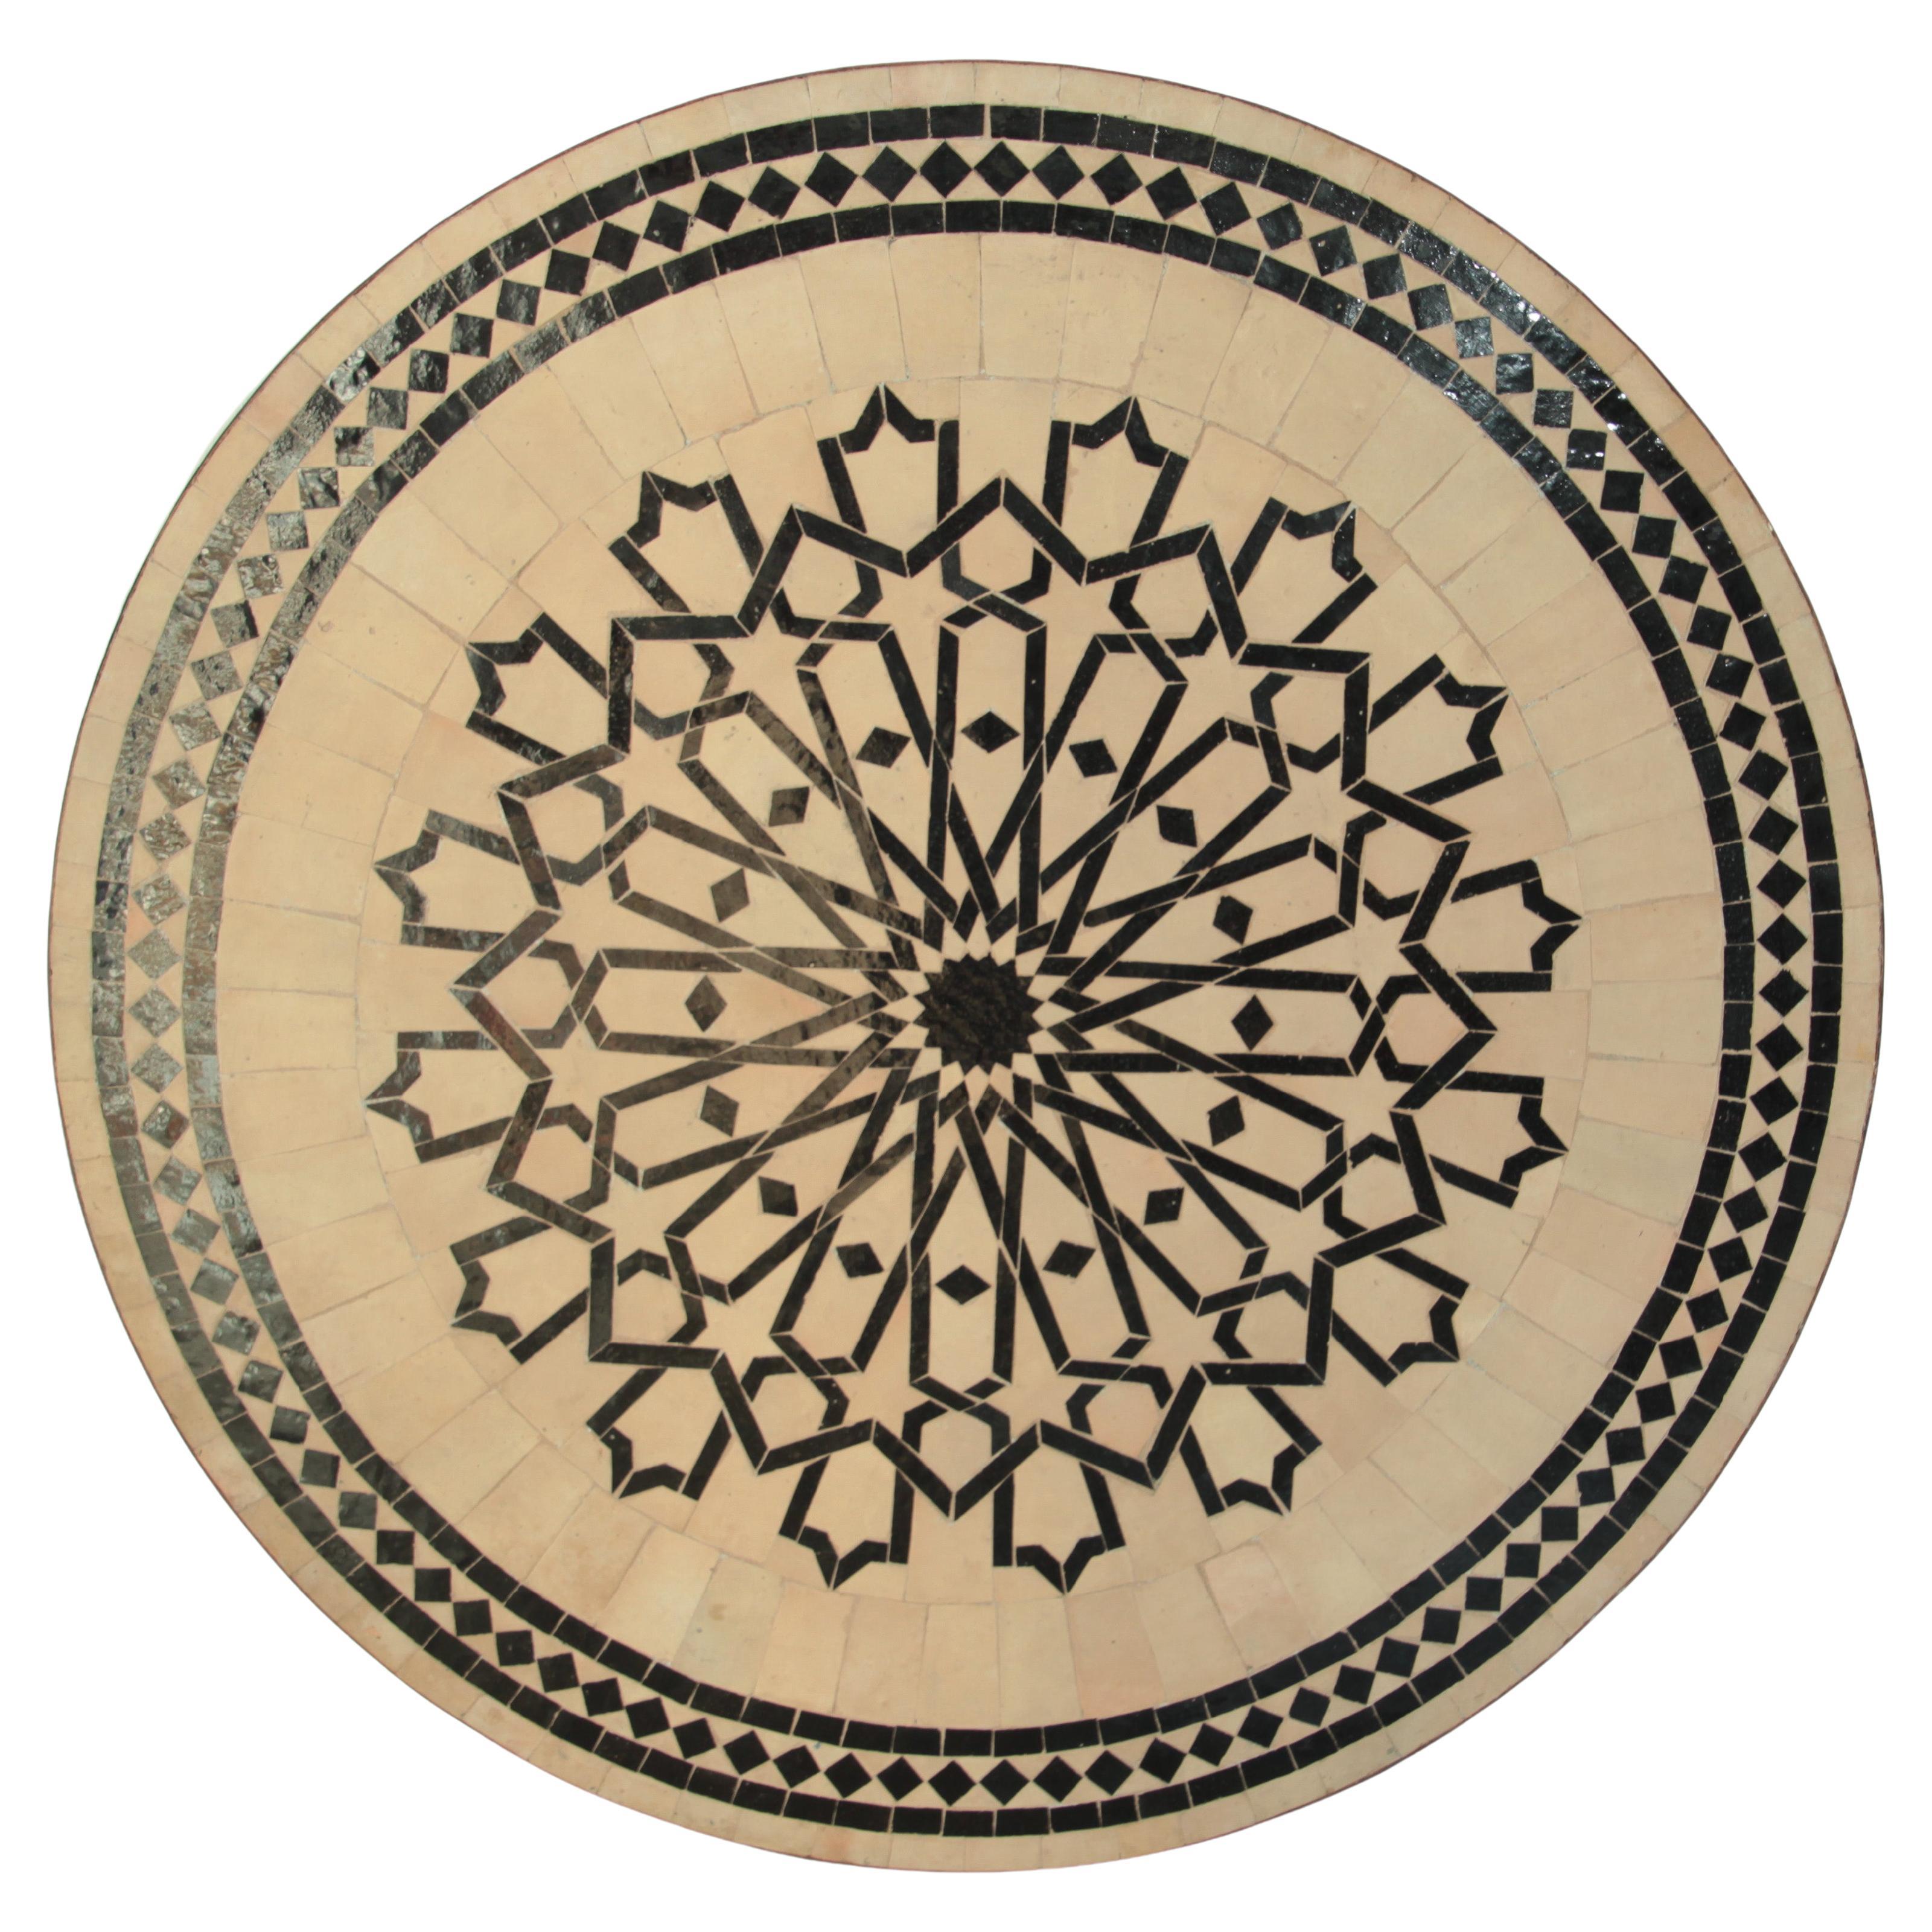 Outdoor Moroccan Round Mosaic Tile Dining Table on Iron Base 47 in.